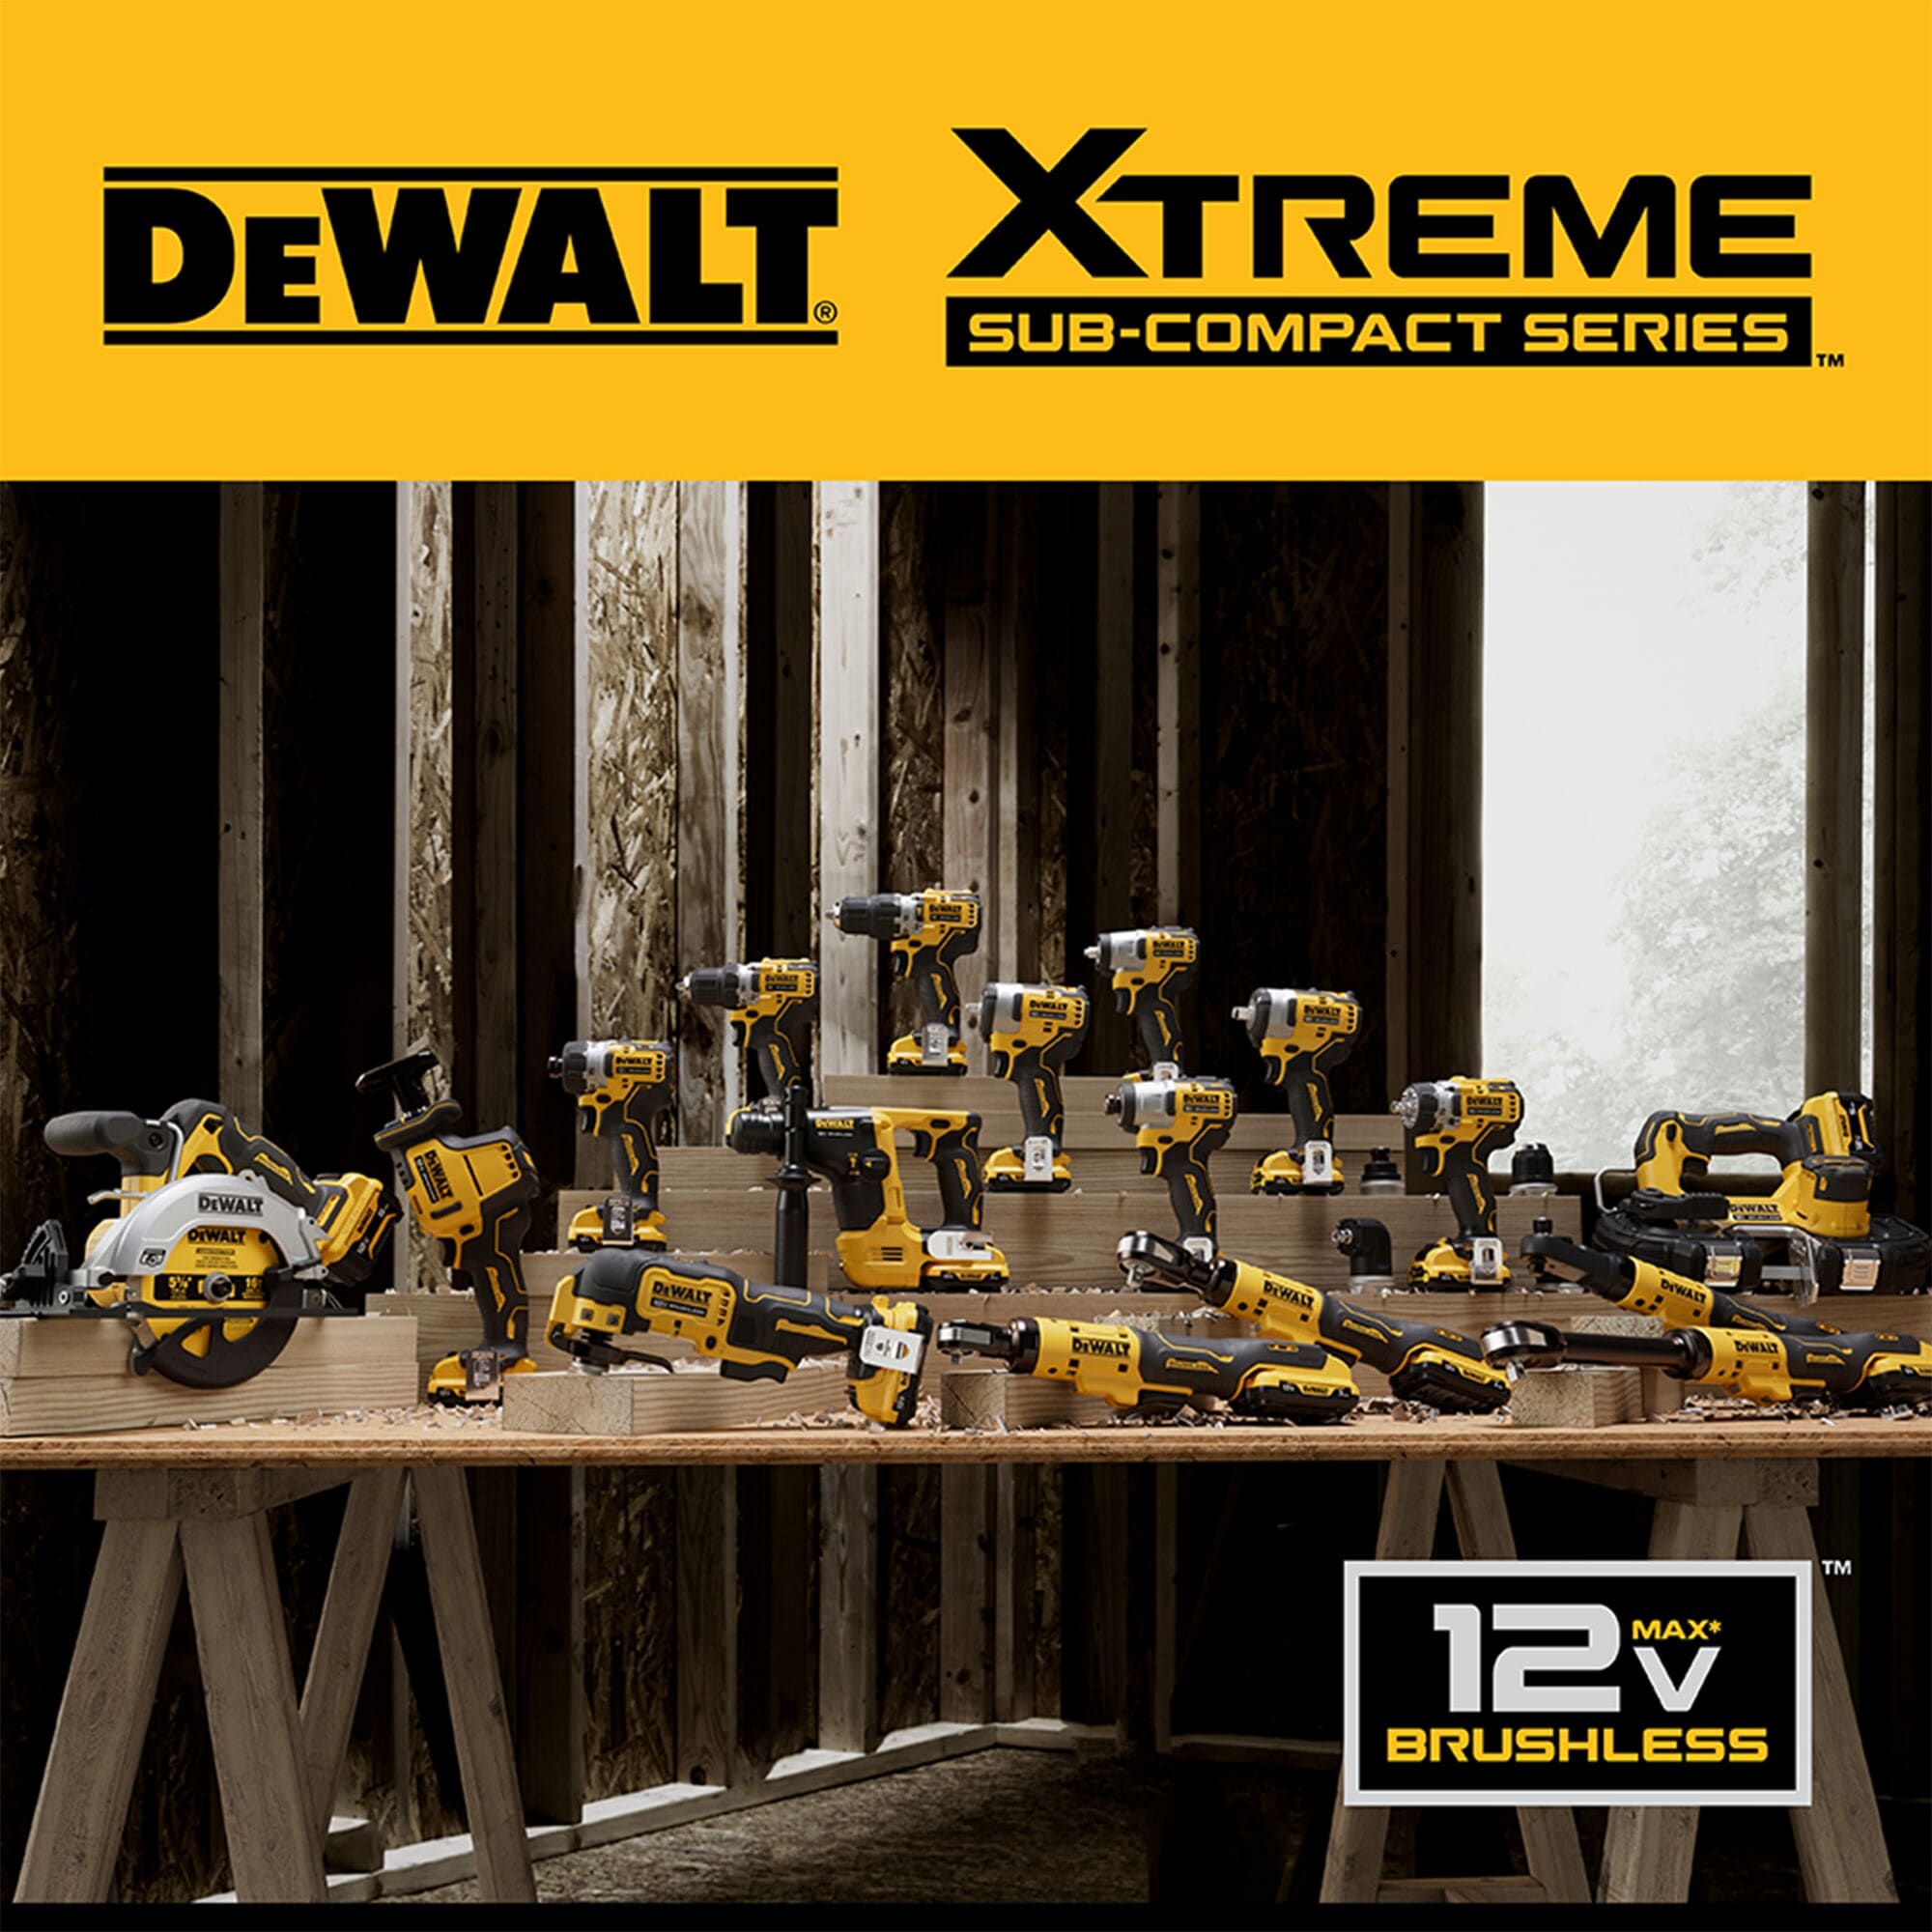 Power the LED Power Rechargeable department DEWALT Flashlights Lithium Cordless Flashlight (li-ion) Max in 130-Lumen Tool at Ion 12-volt Tool